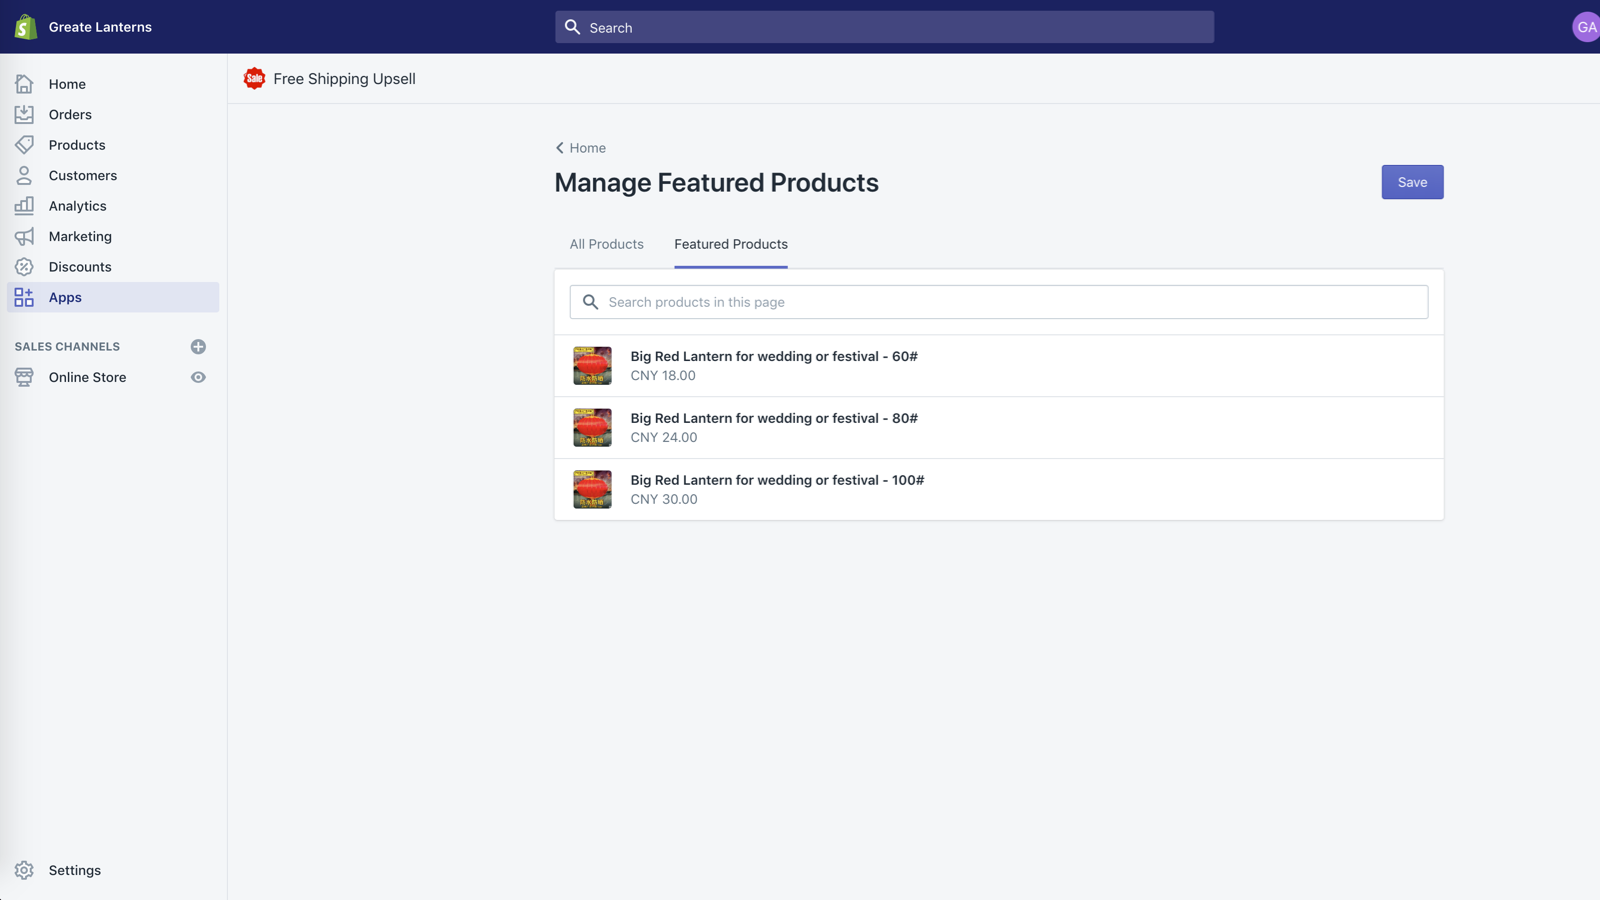 configure free shipping upsell - manage featured products